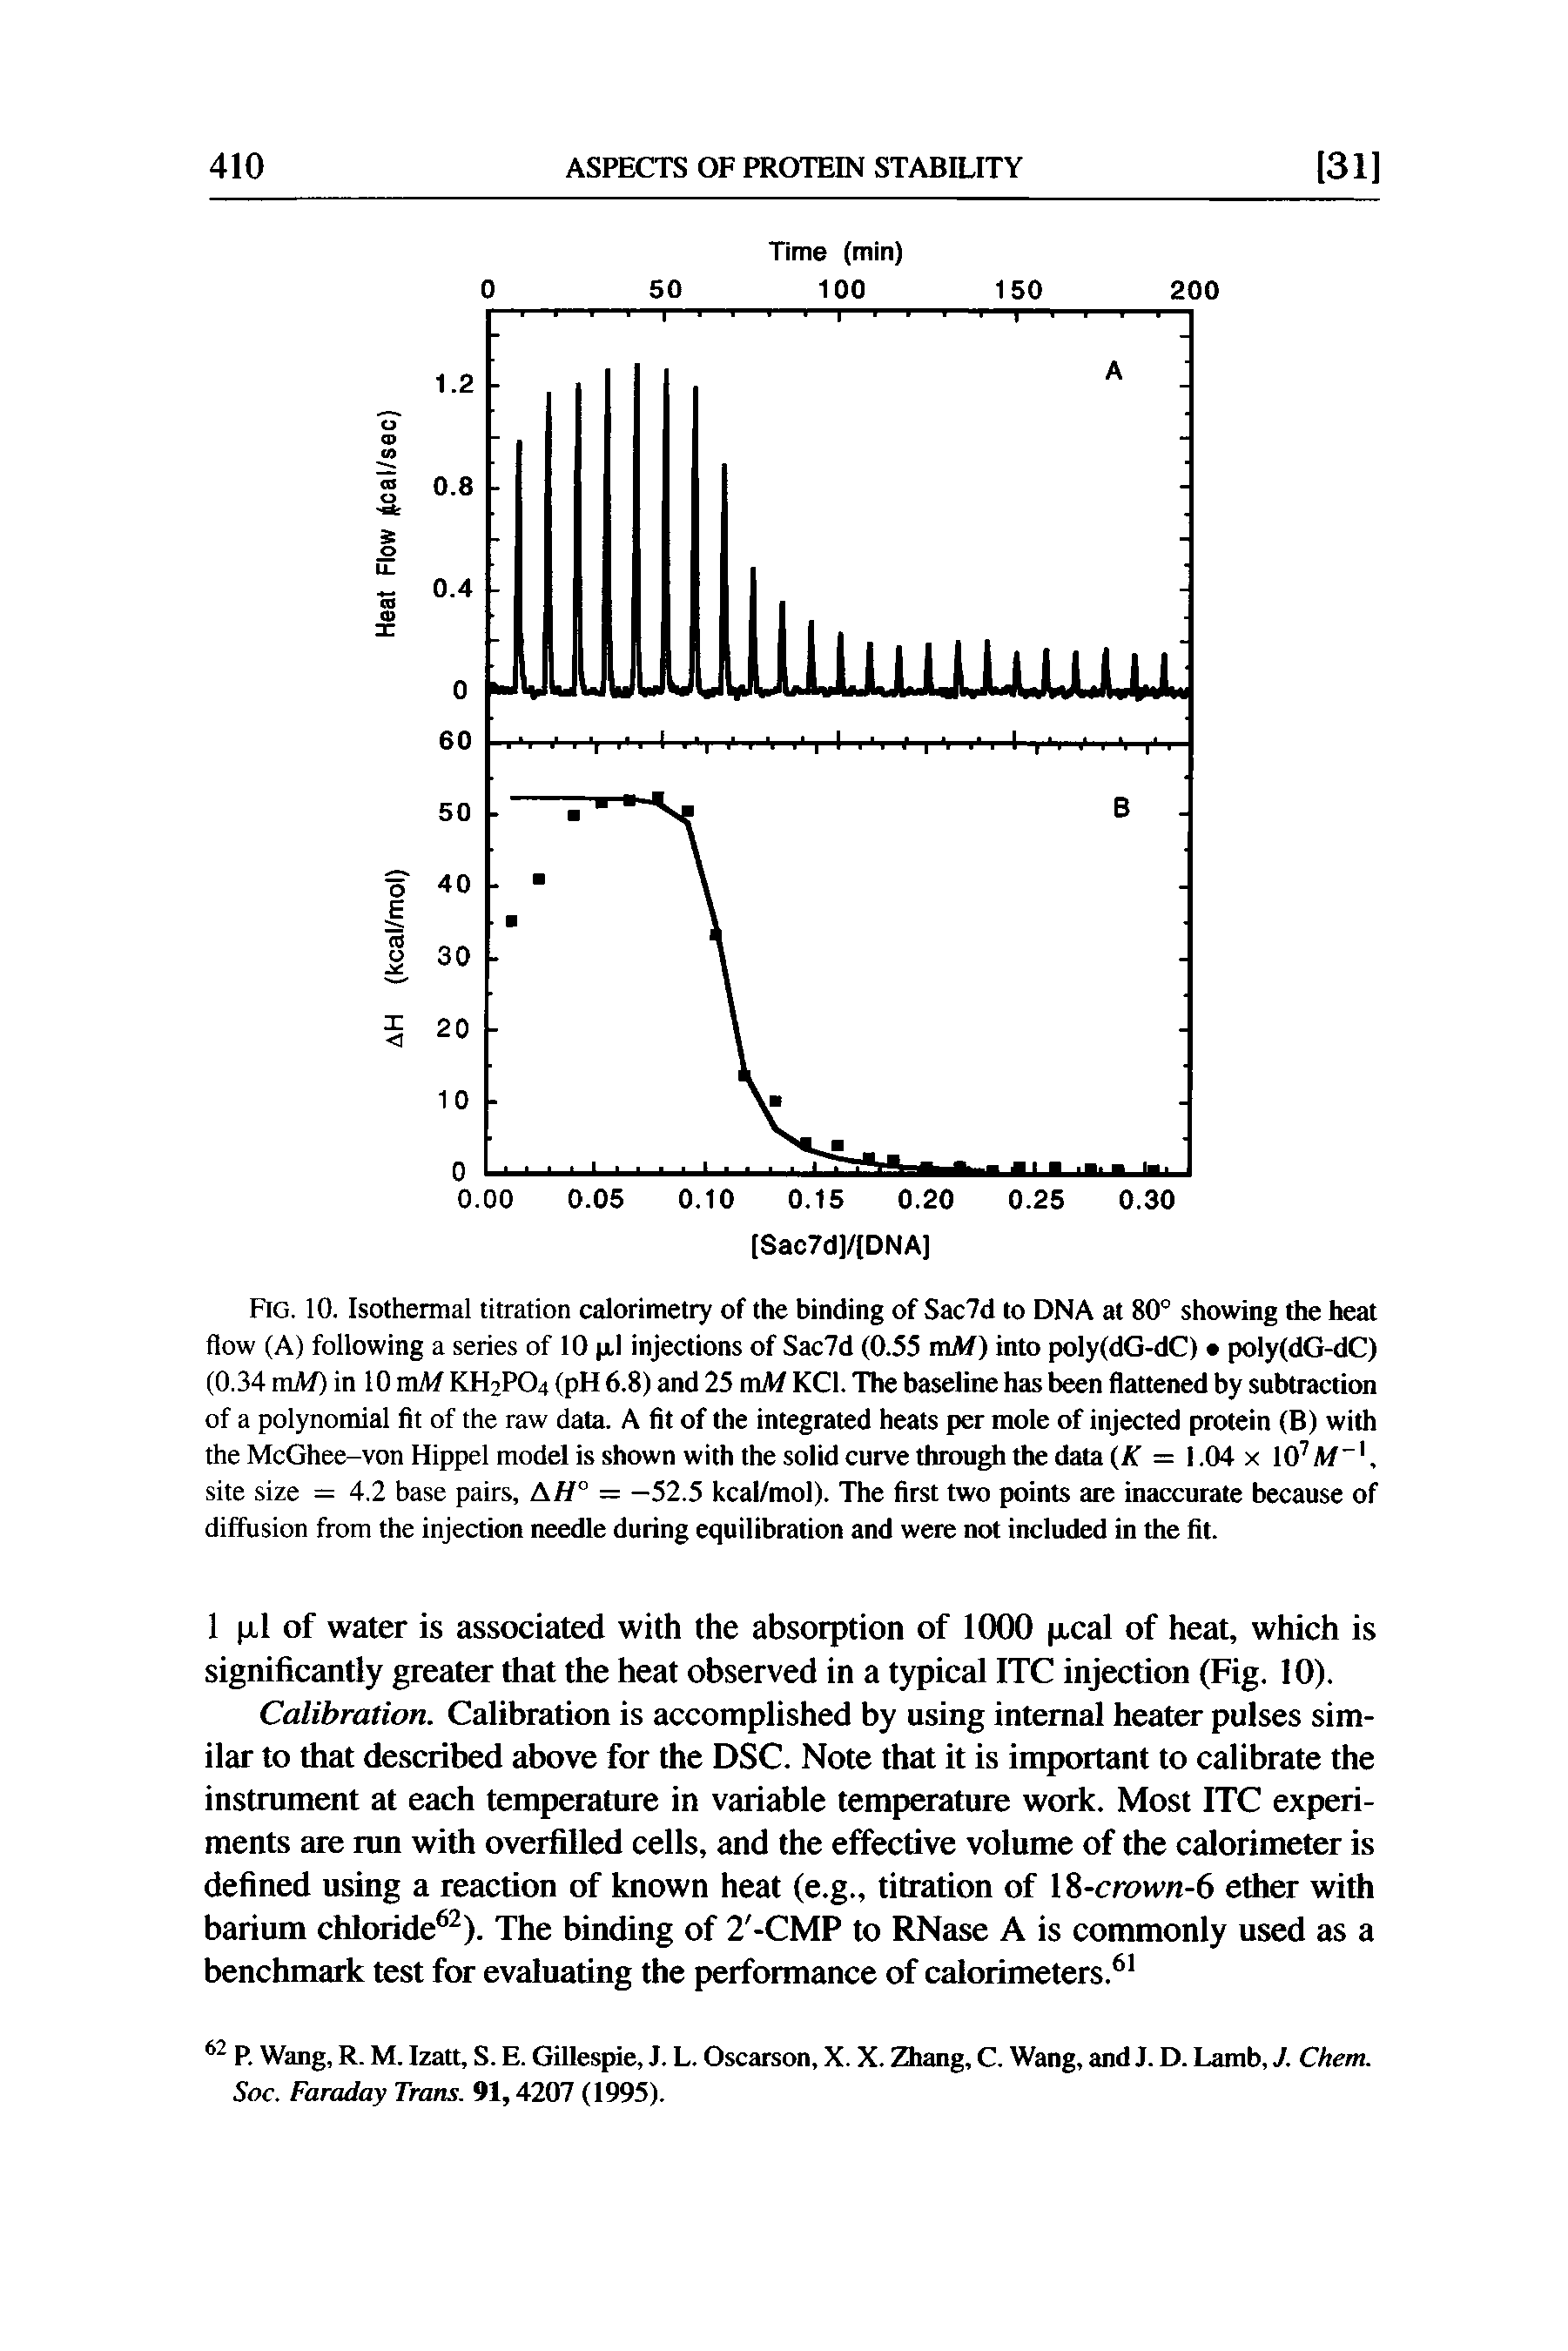 Fig. 10. Isothermal titration calorimetry of the binding of Sac7d to DNA at 80° showing the heat flow (A) following a series of 10 n,l injections of Sac7d (0.55 mAf) into poly(dG-dC) poly(dG-dC) (0.34 mM) in 10 mAf KH2PO4 (pH 6.8) and 25 xnM KCl. The baseline has been flattened by subtraction of a polynomial fit of the raw data. A fit of the integrated heats per mole of injected protein (B) with the McGhee-von Hippel model is shown with the solid curve through the data (A( = 1.04 x lO W", site size = 4.2 base pairs, A/f° = —52.5 kcal/mol). The first two points are inaccurate because of diffusion from the injection needle during equilibration and were not included in the fit.